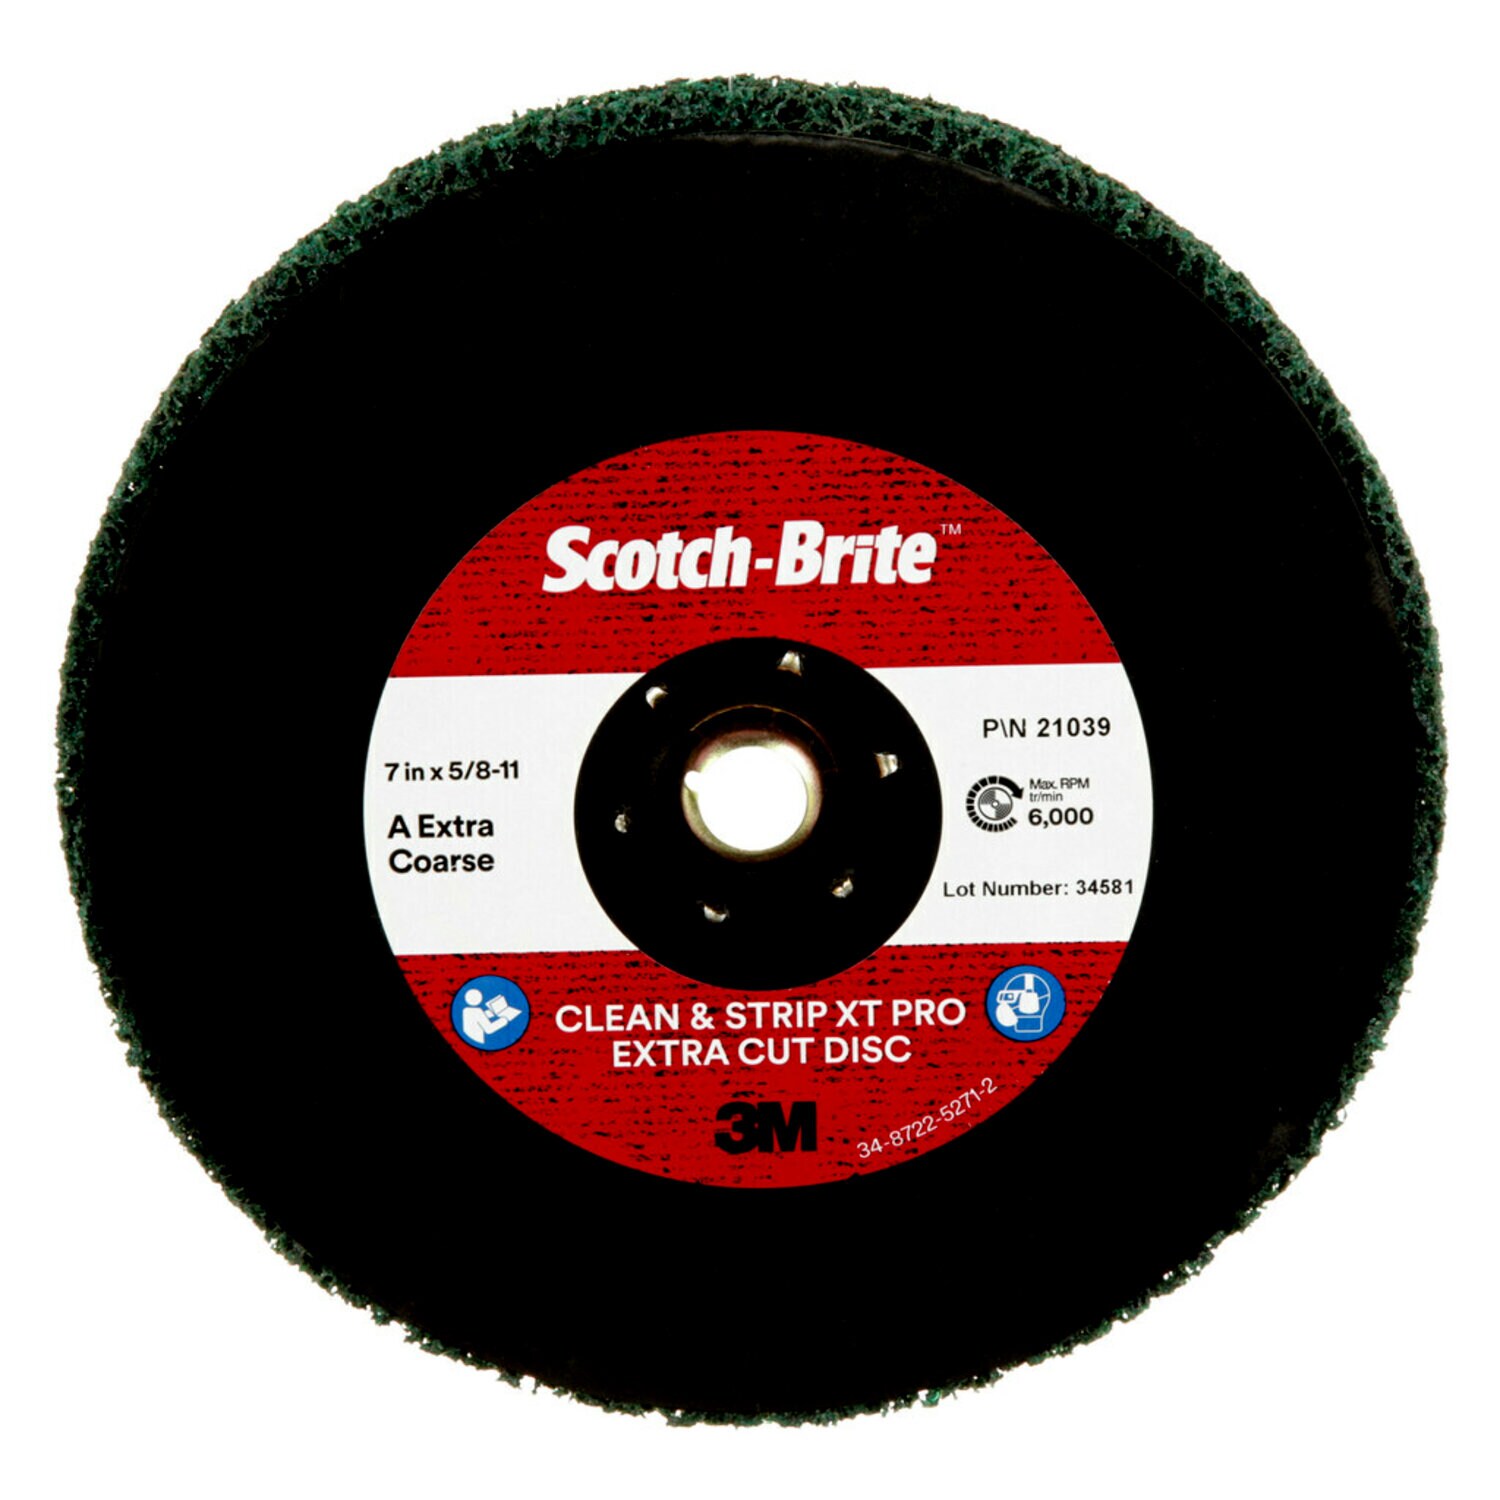 7100175522 - Scotch-Brite Clean and Strip XT Pro Extra Cut TN Quick Change Disc, XC-DN, A/O Extra Coarse, Green, 7 in x 5/8 in-11, 5 ea/Case